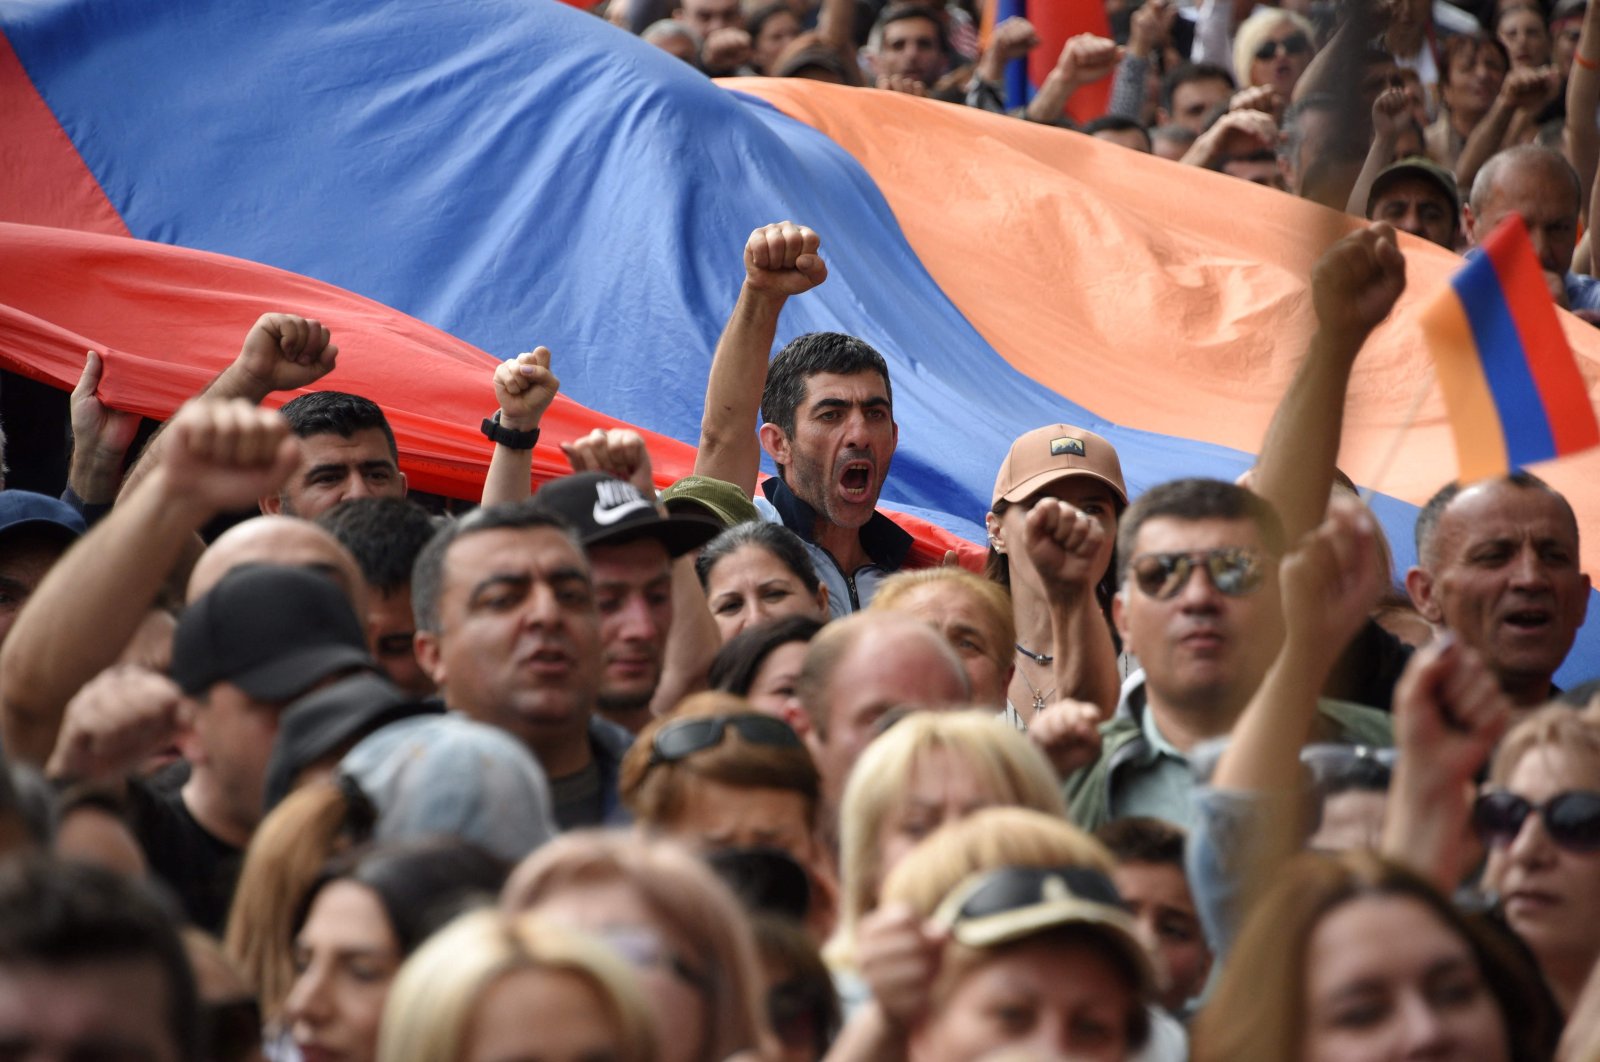 Demonstrators shout slogans as they attend an opposition rally in Yerevan on May 1, 2022, held to protest against Karabakh concessions. (AFP Photo)